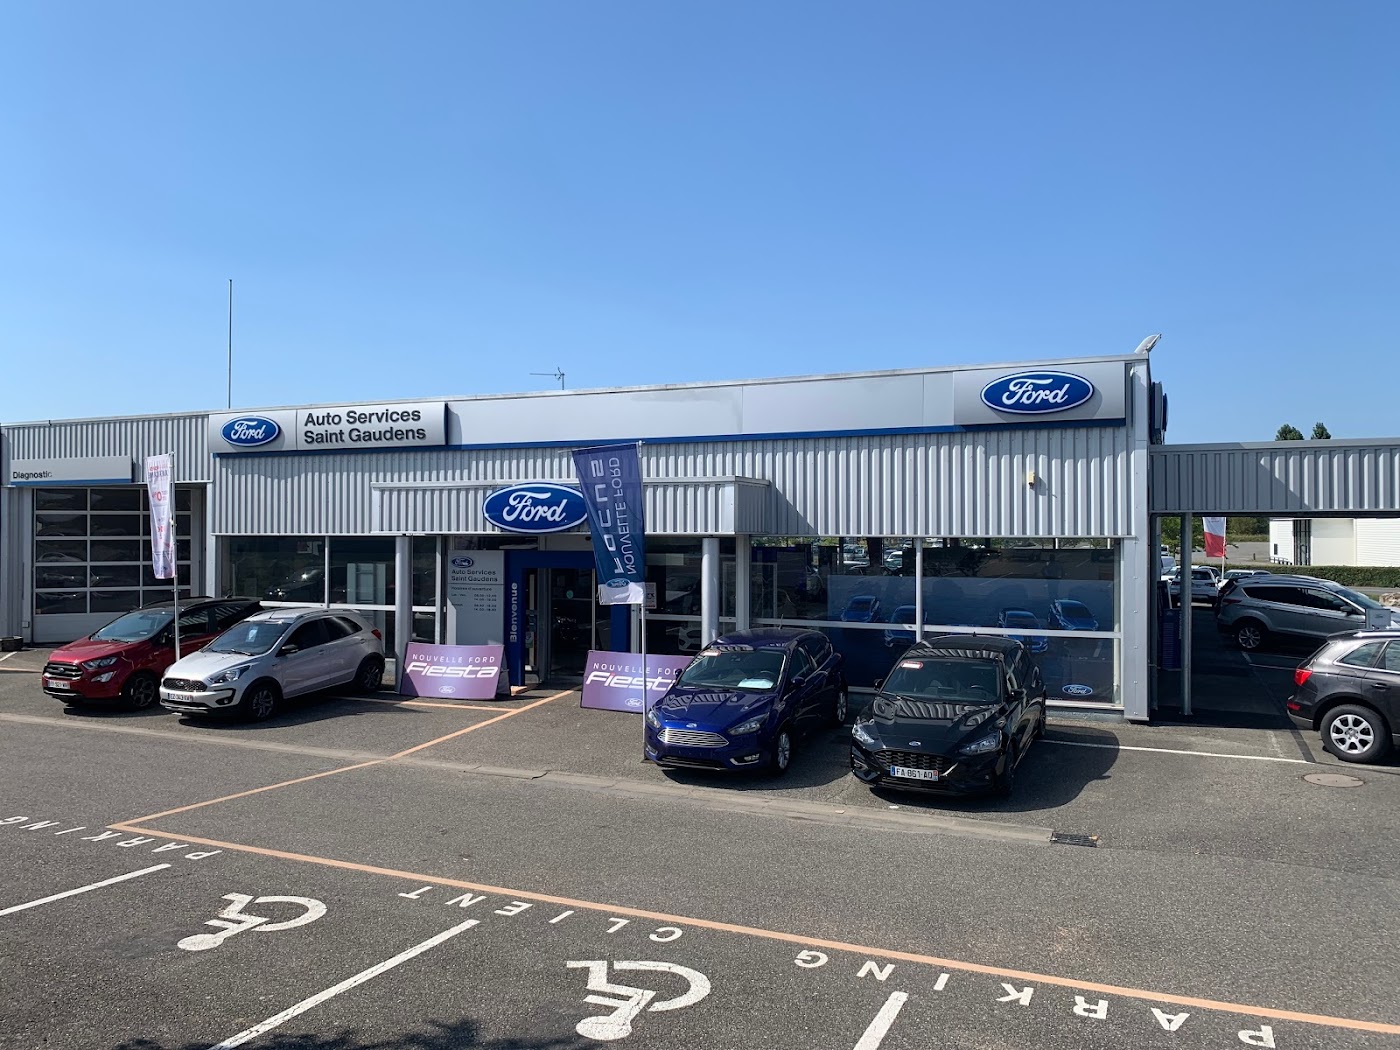 FORD ST GAUDENS - Auto Services